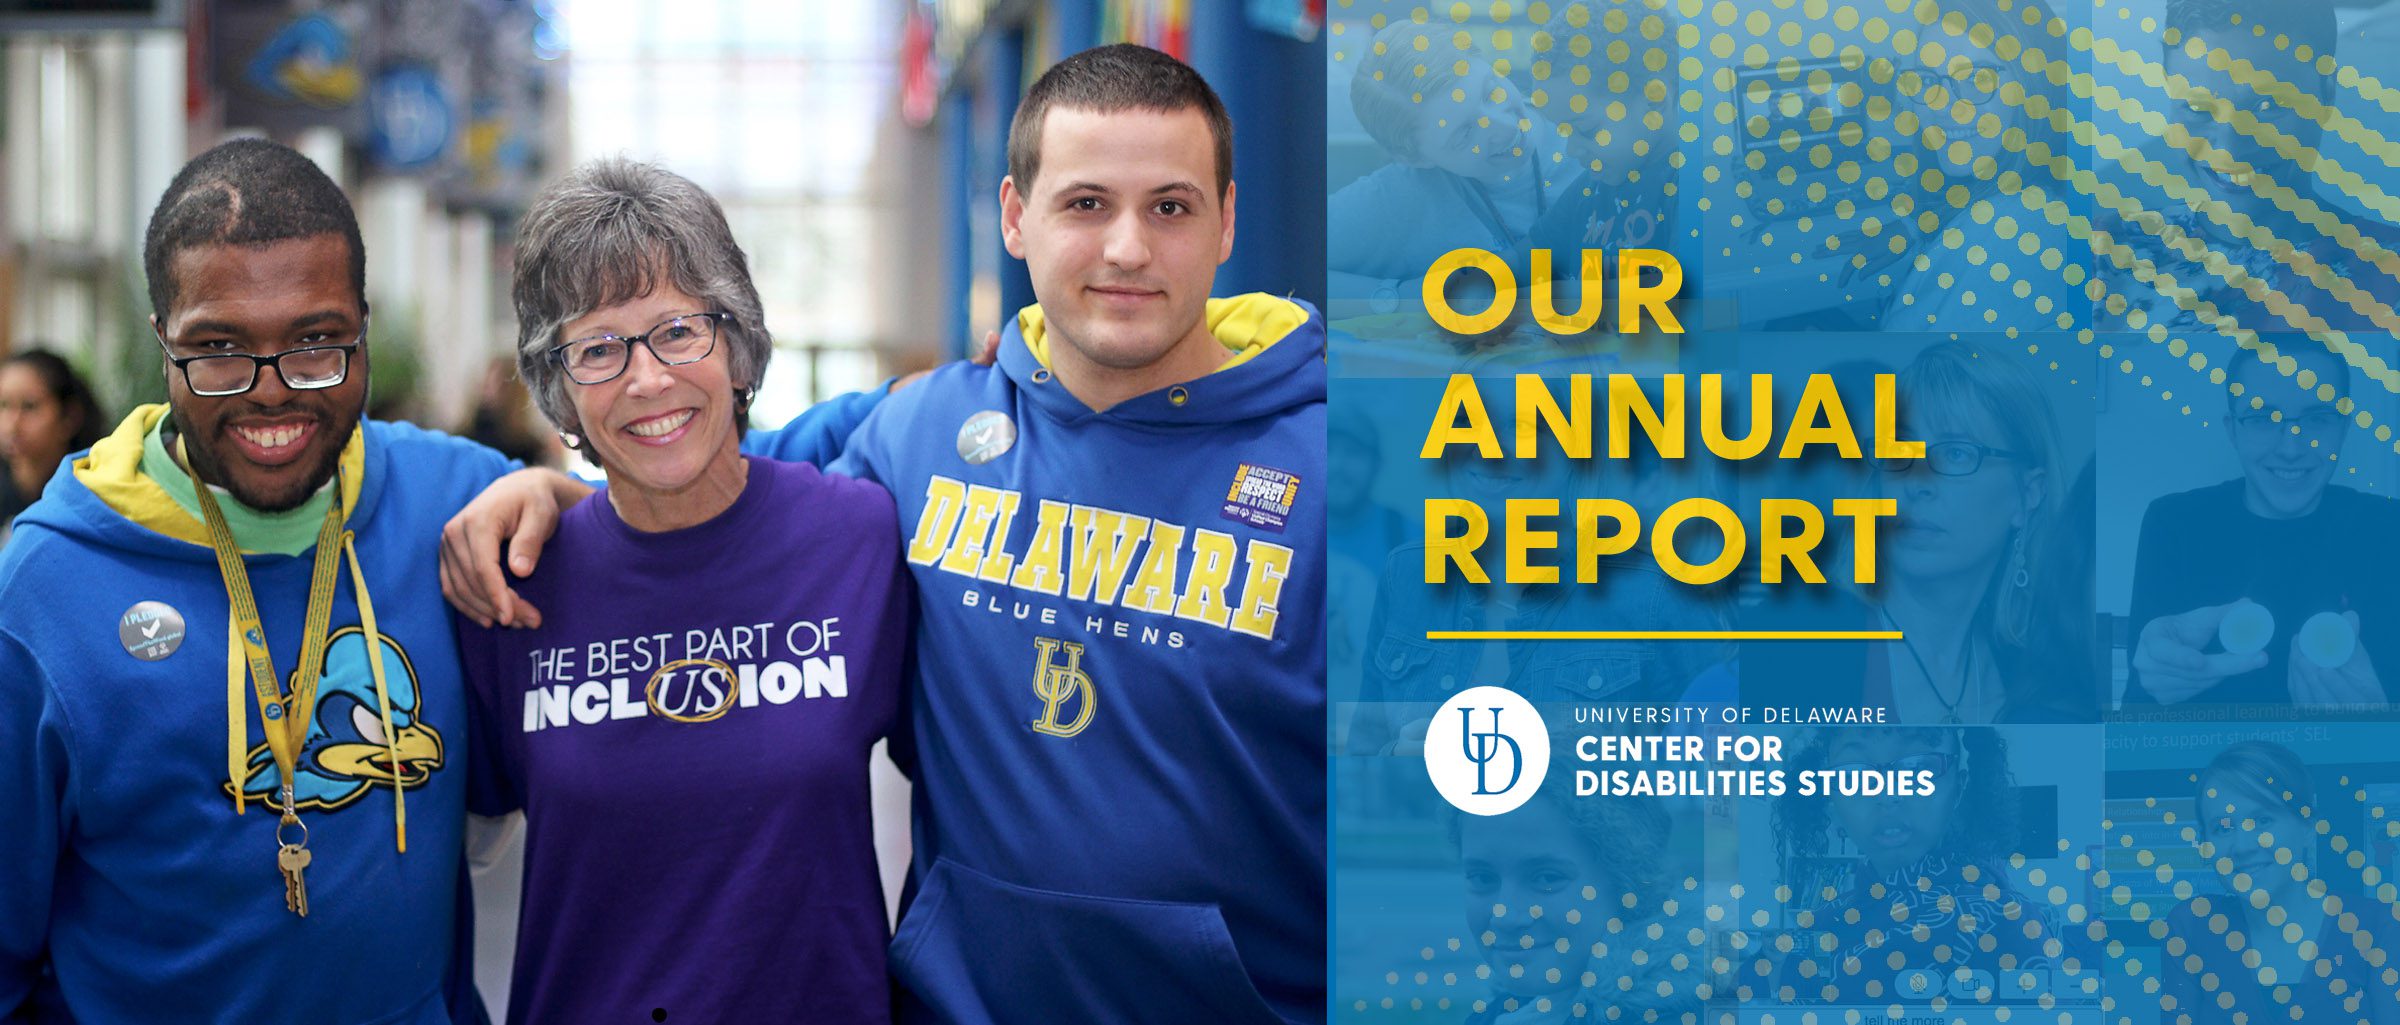 Text reads Our Annual Report accompanied by the Center for Disabilities Studies logo. The Annual Report cover photo is displayed to the left. In it, a female educator with short gray hair stands arm-in-arm with two young men, both wearing University of Delaware branded sweatshirts. The educator's shirt reads The Best Part of Inclusion with the US in the last word circled. All are smiling.